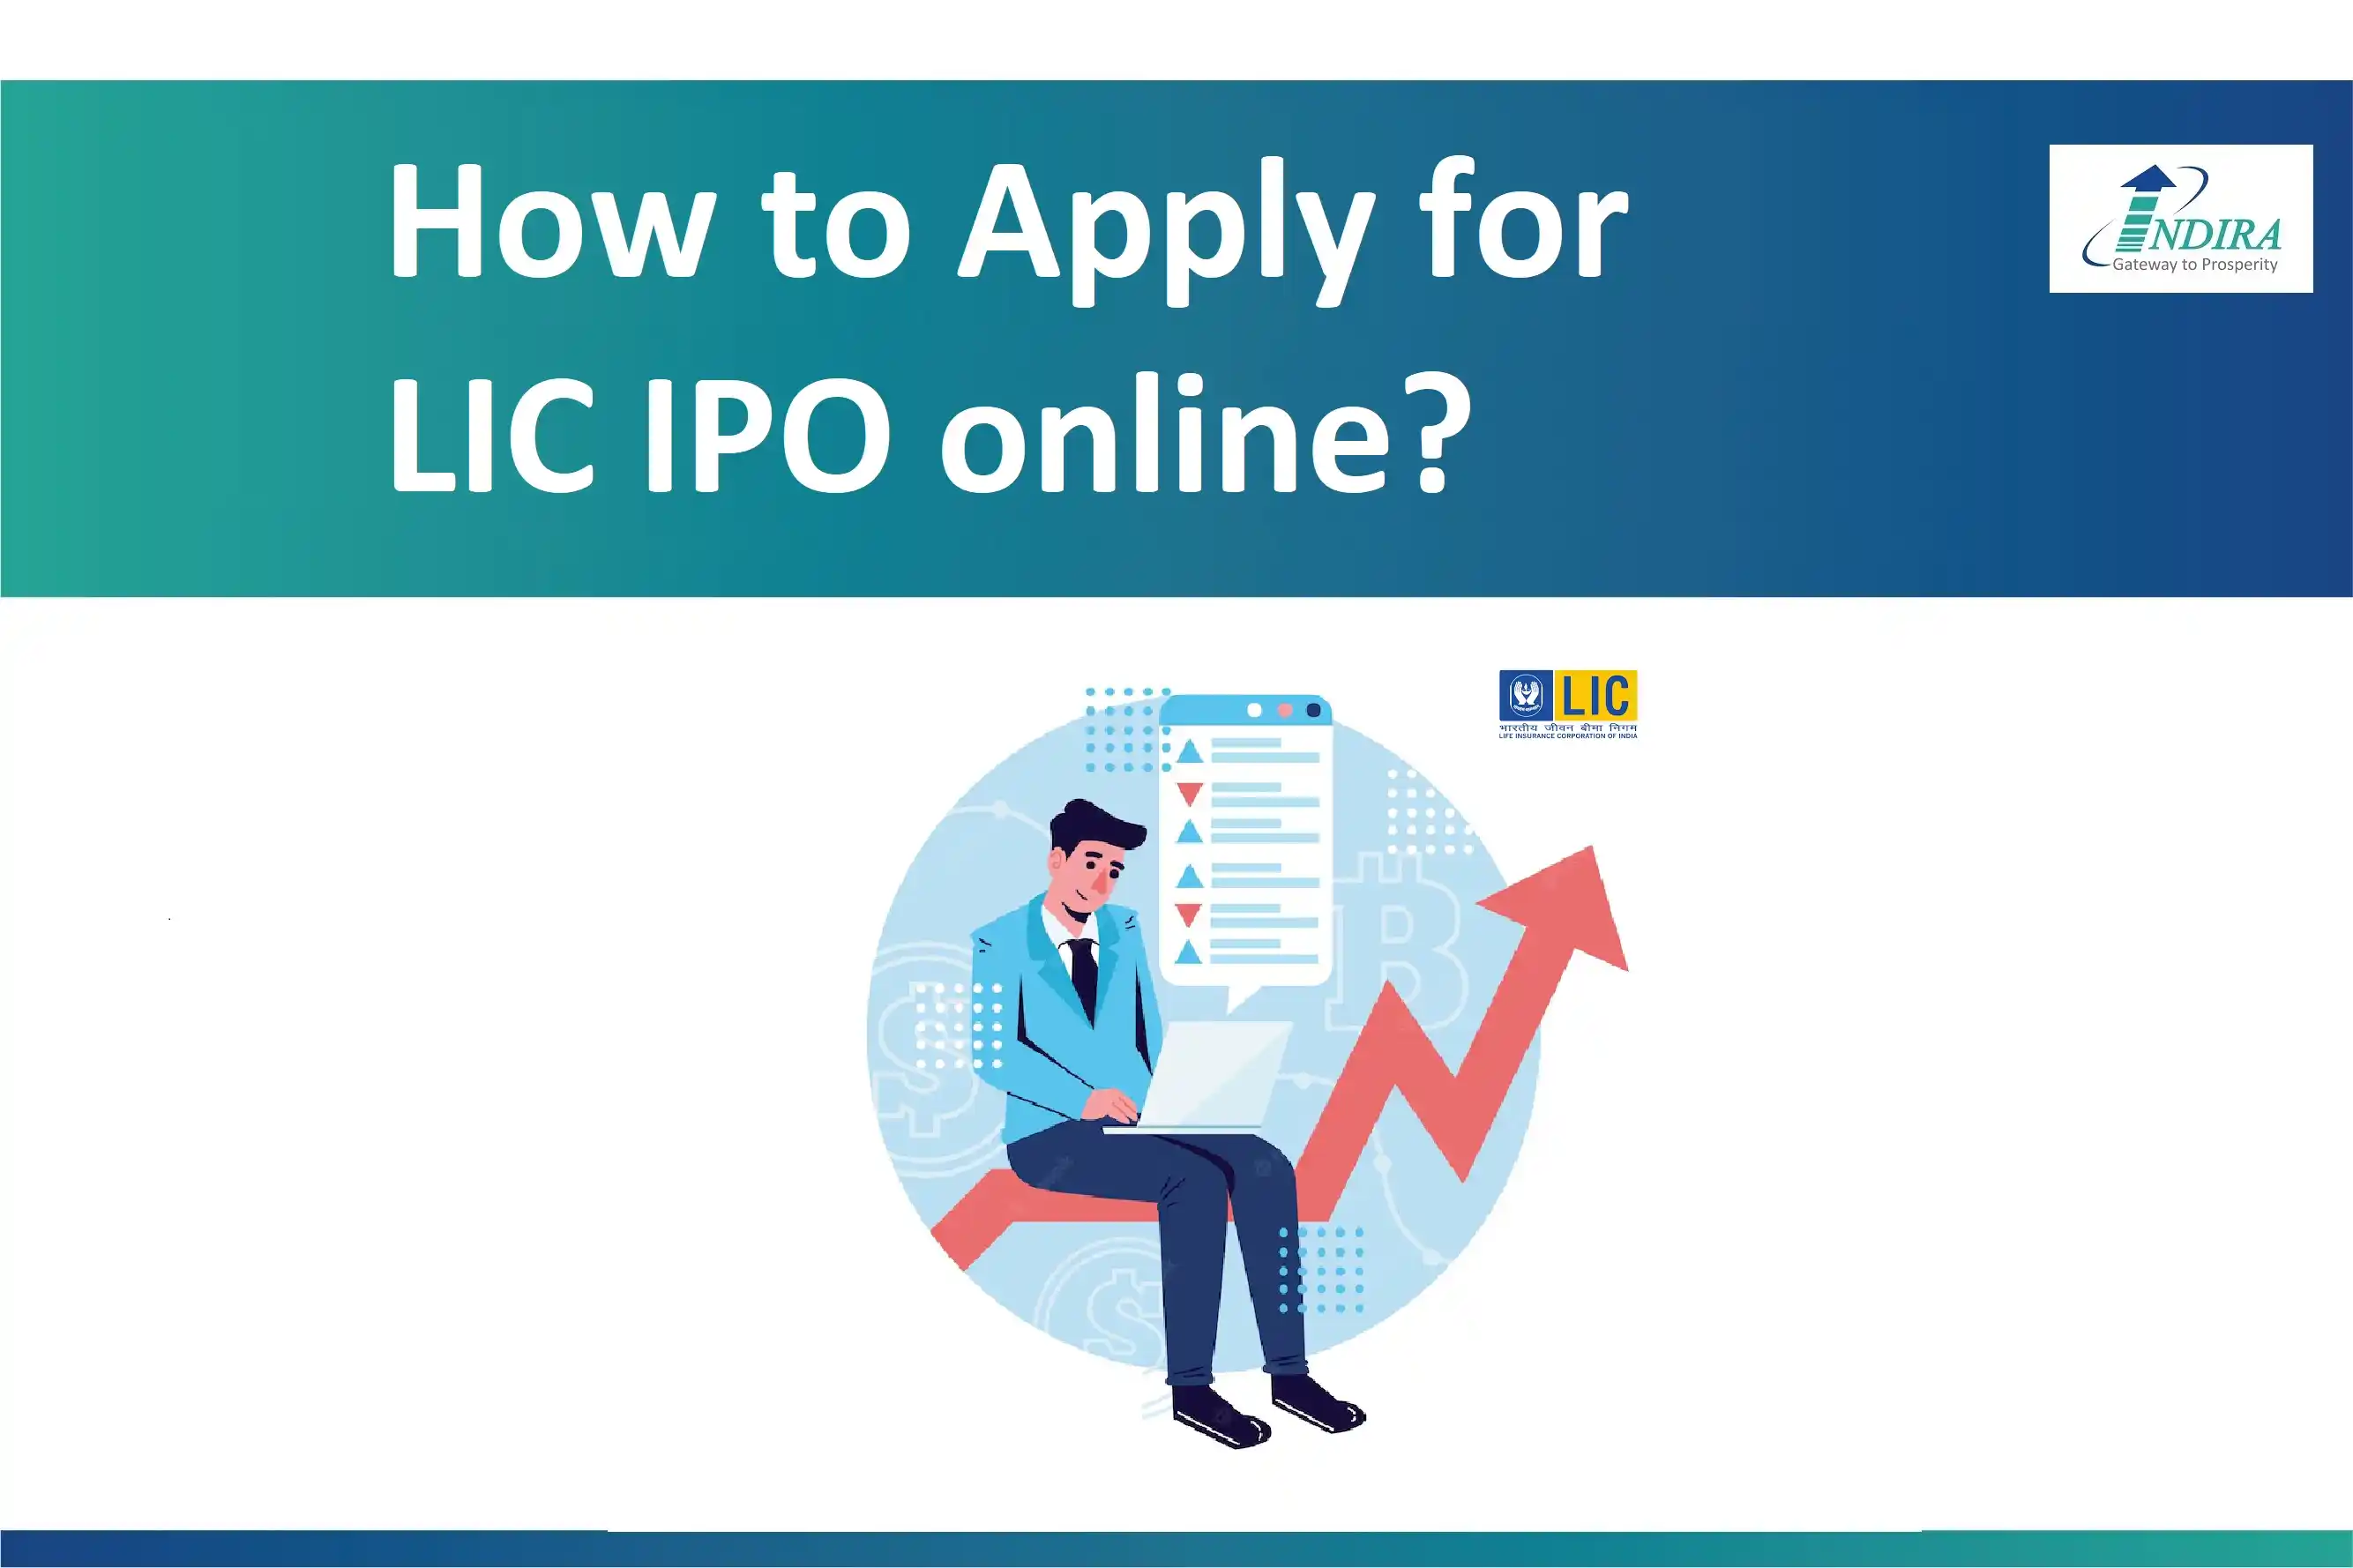 How to apply for LIC IPO online?